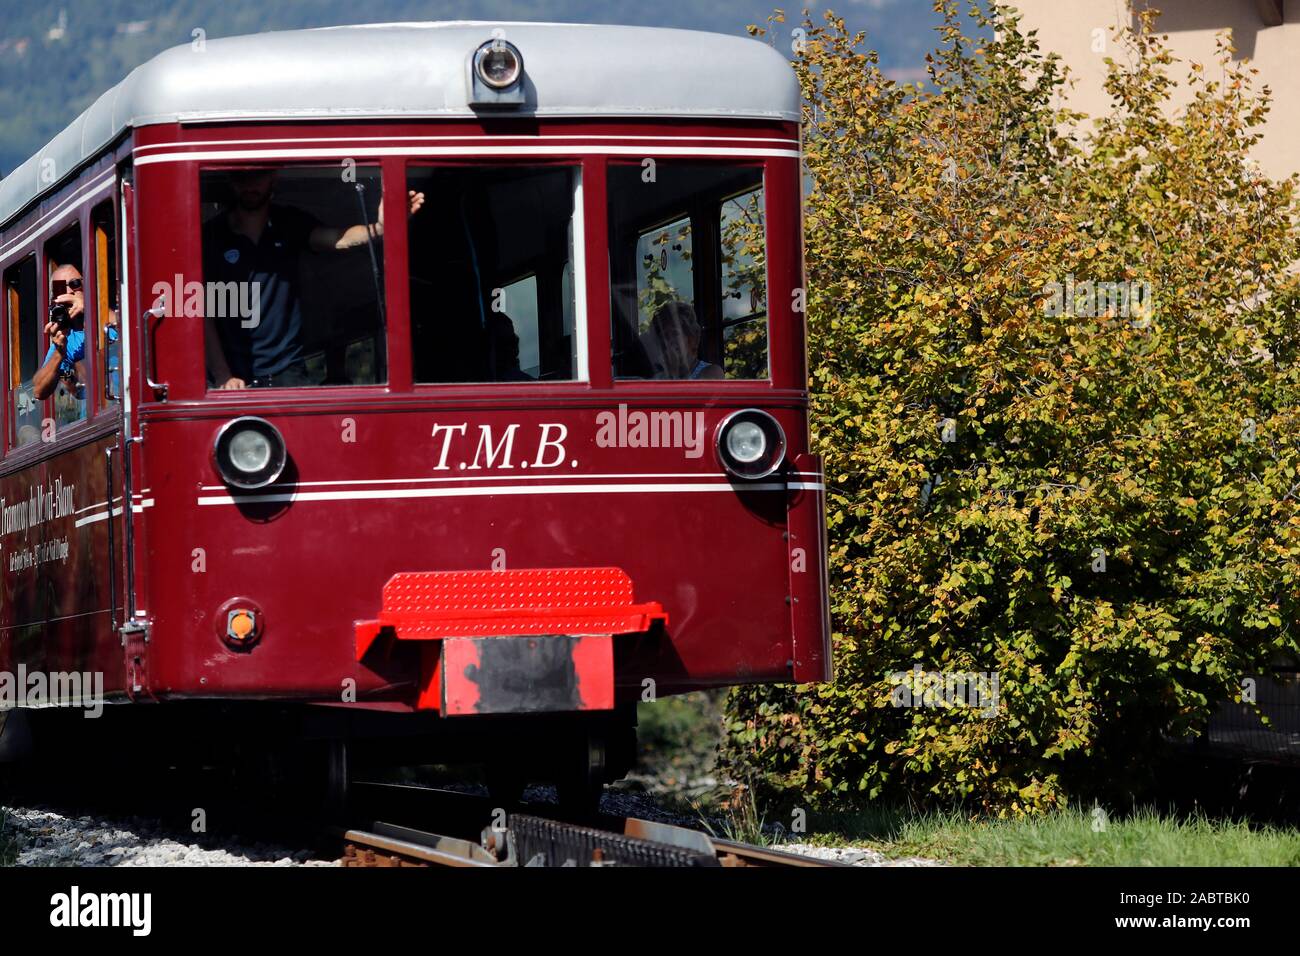 The Mont Blanc Tramway (TMB) is the highest mountain railway line in France. Saint-Gervais. France. Stock Photo